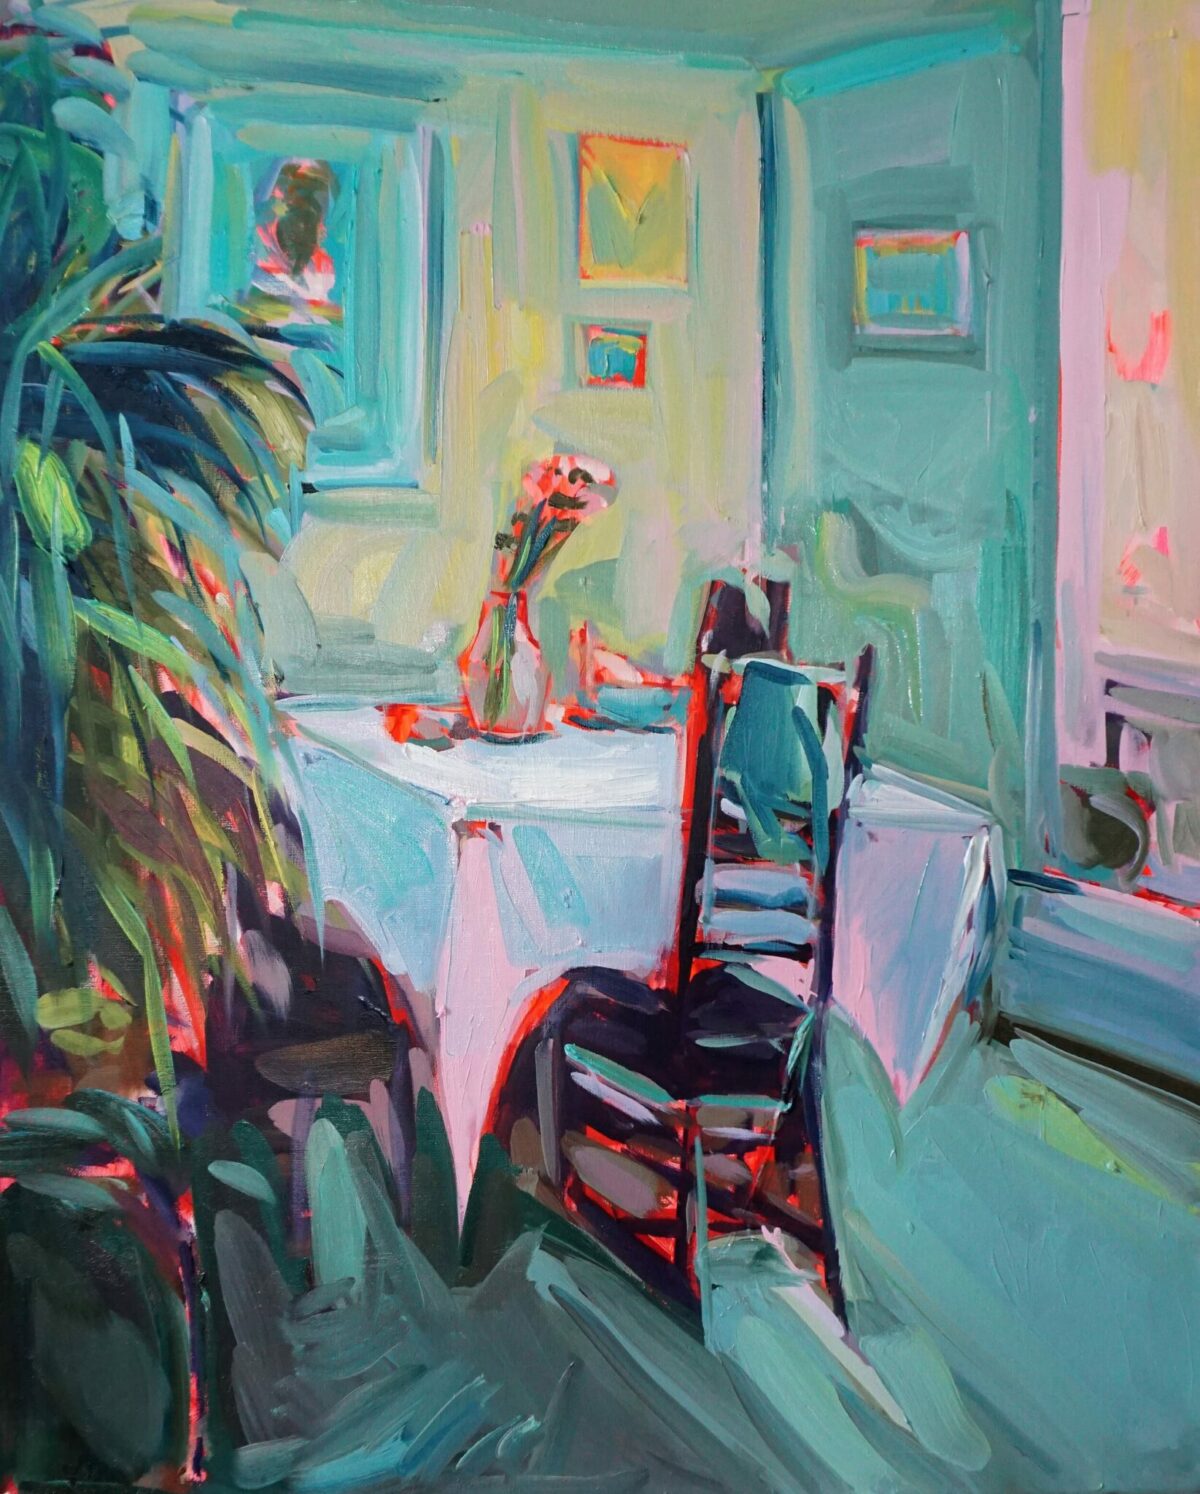 Sublime Paintings Of Intimate Home Spaces By Ekaterina Popova 10